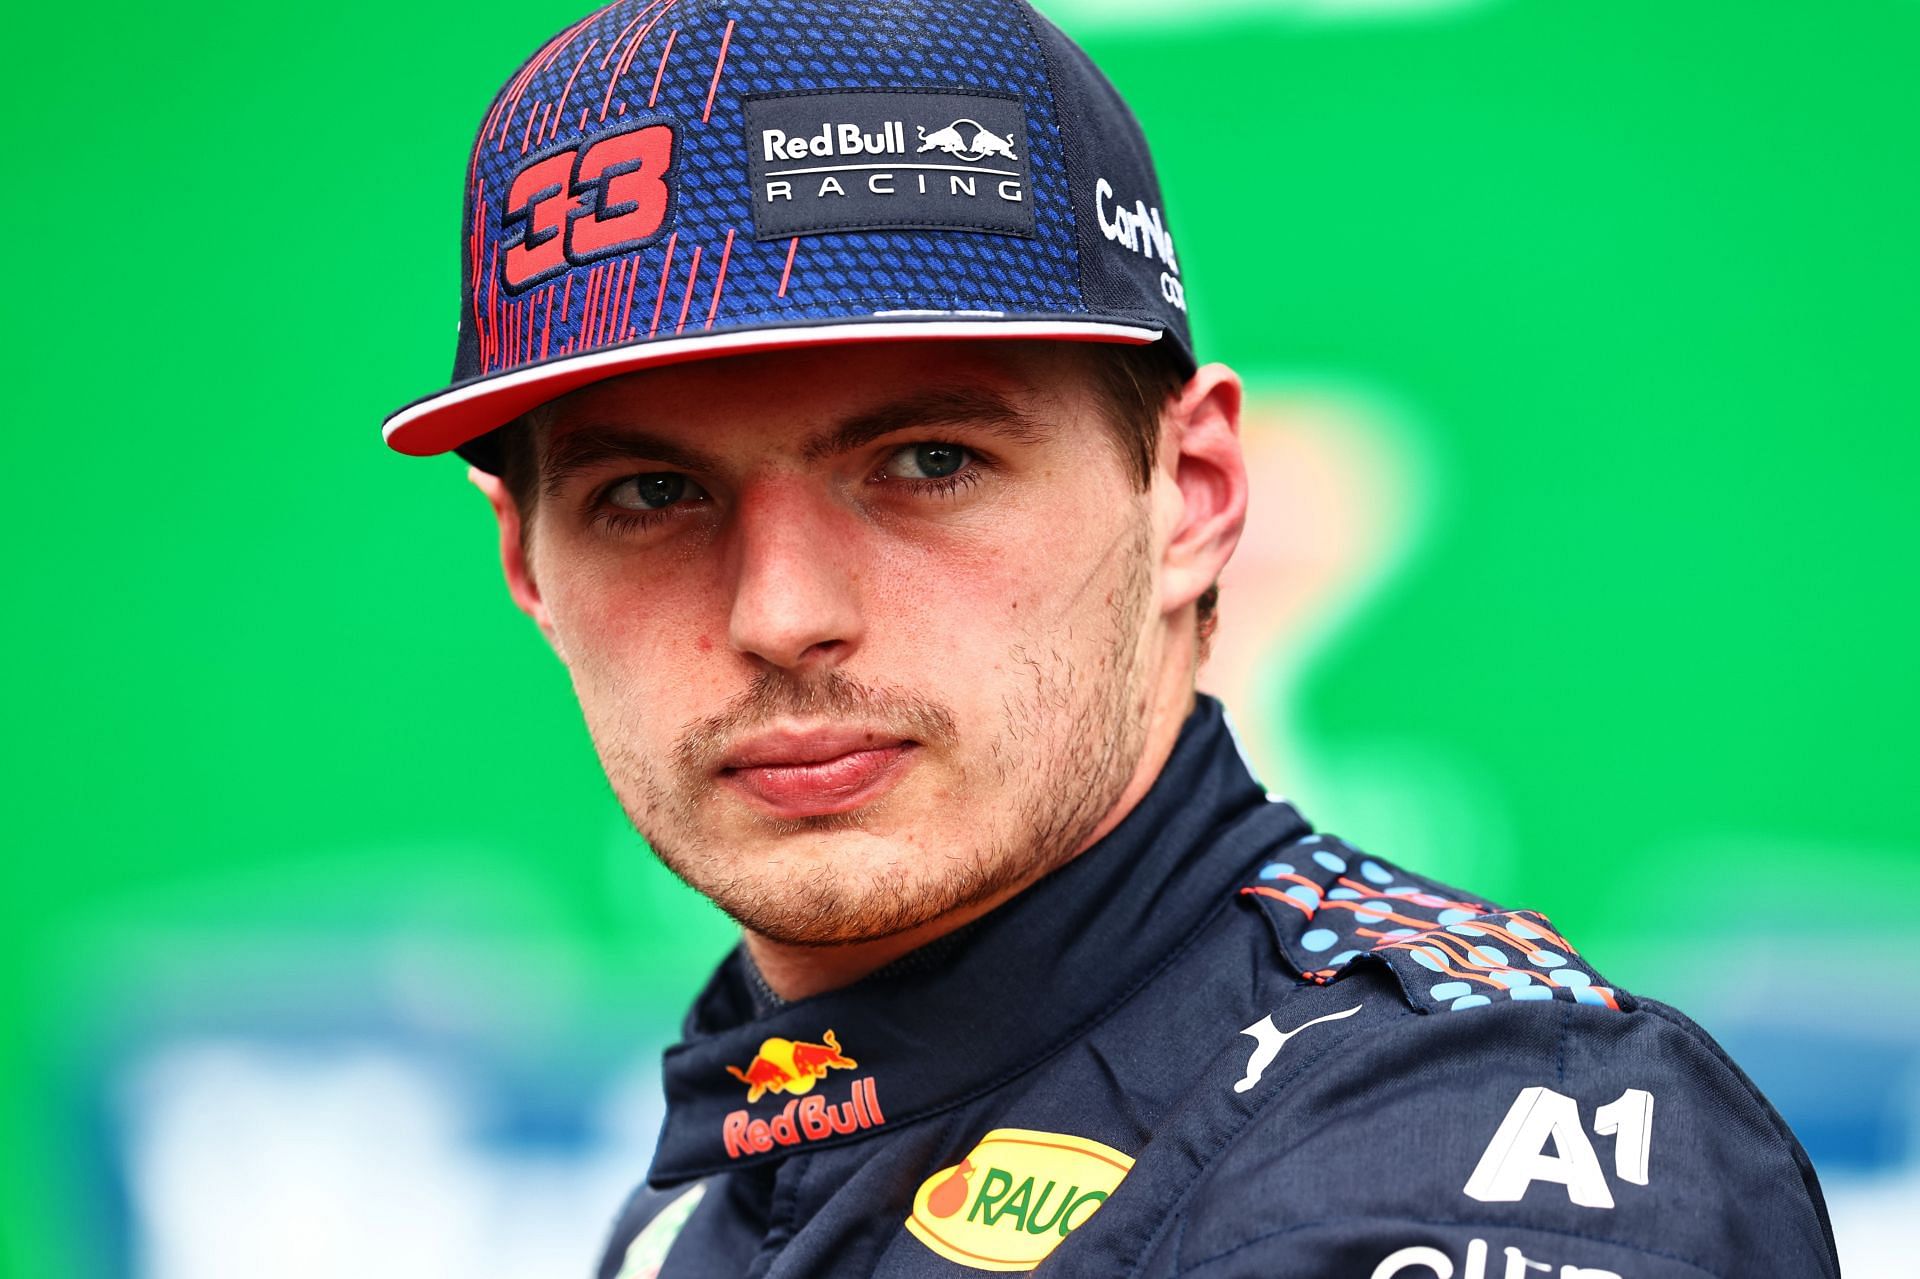 Max Verstappen was the traget of online abuse following his controversial defence at the Brazilian Grand Prix